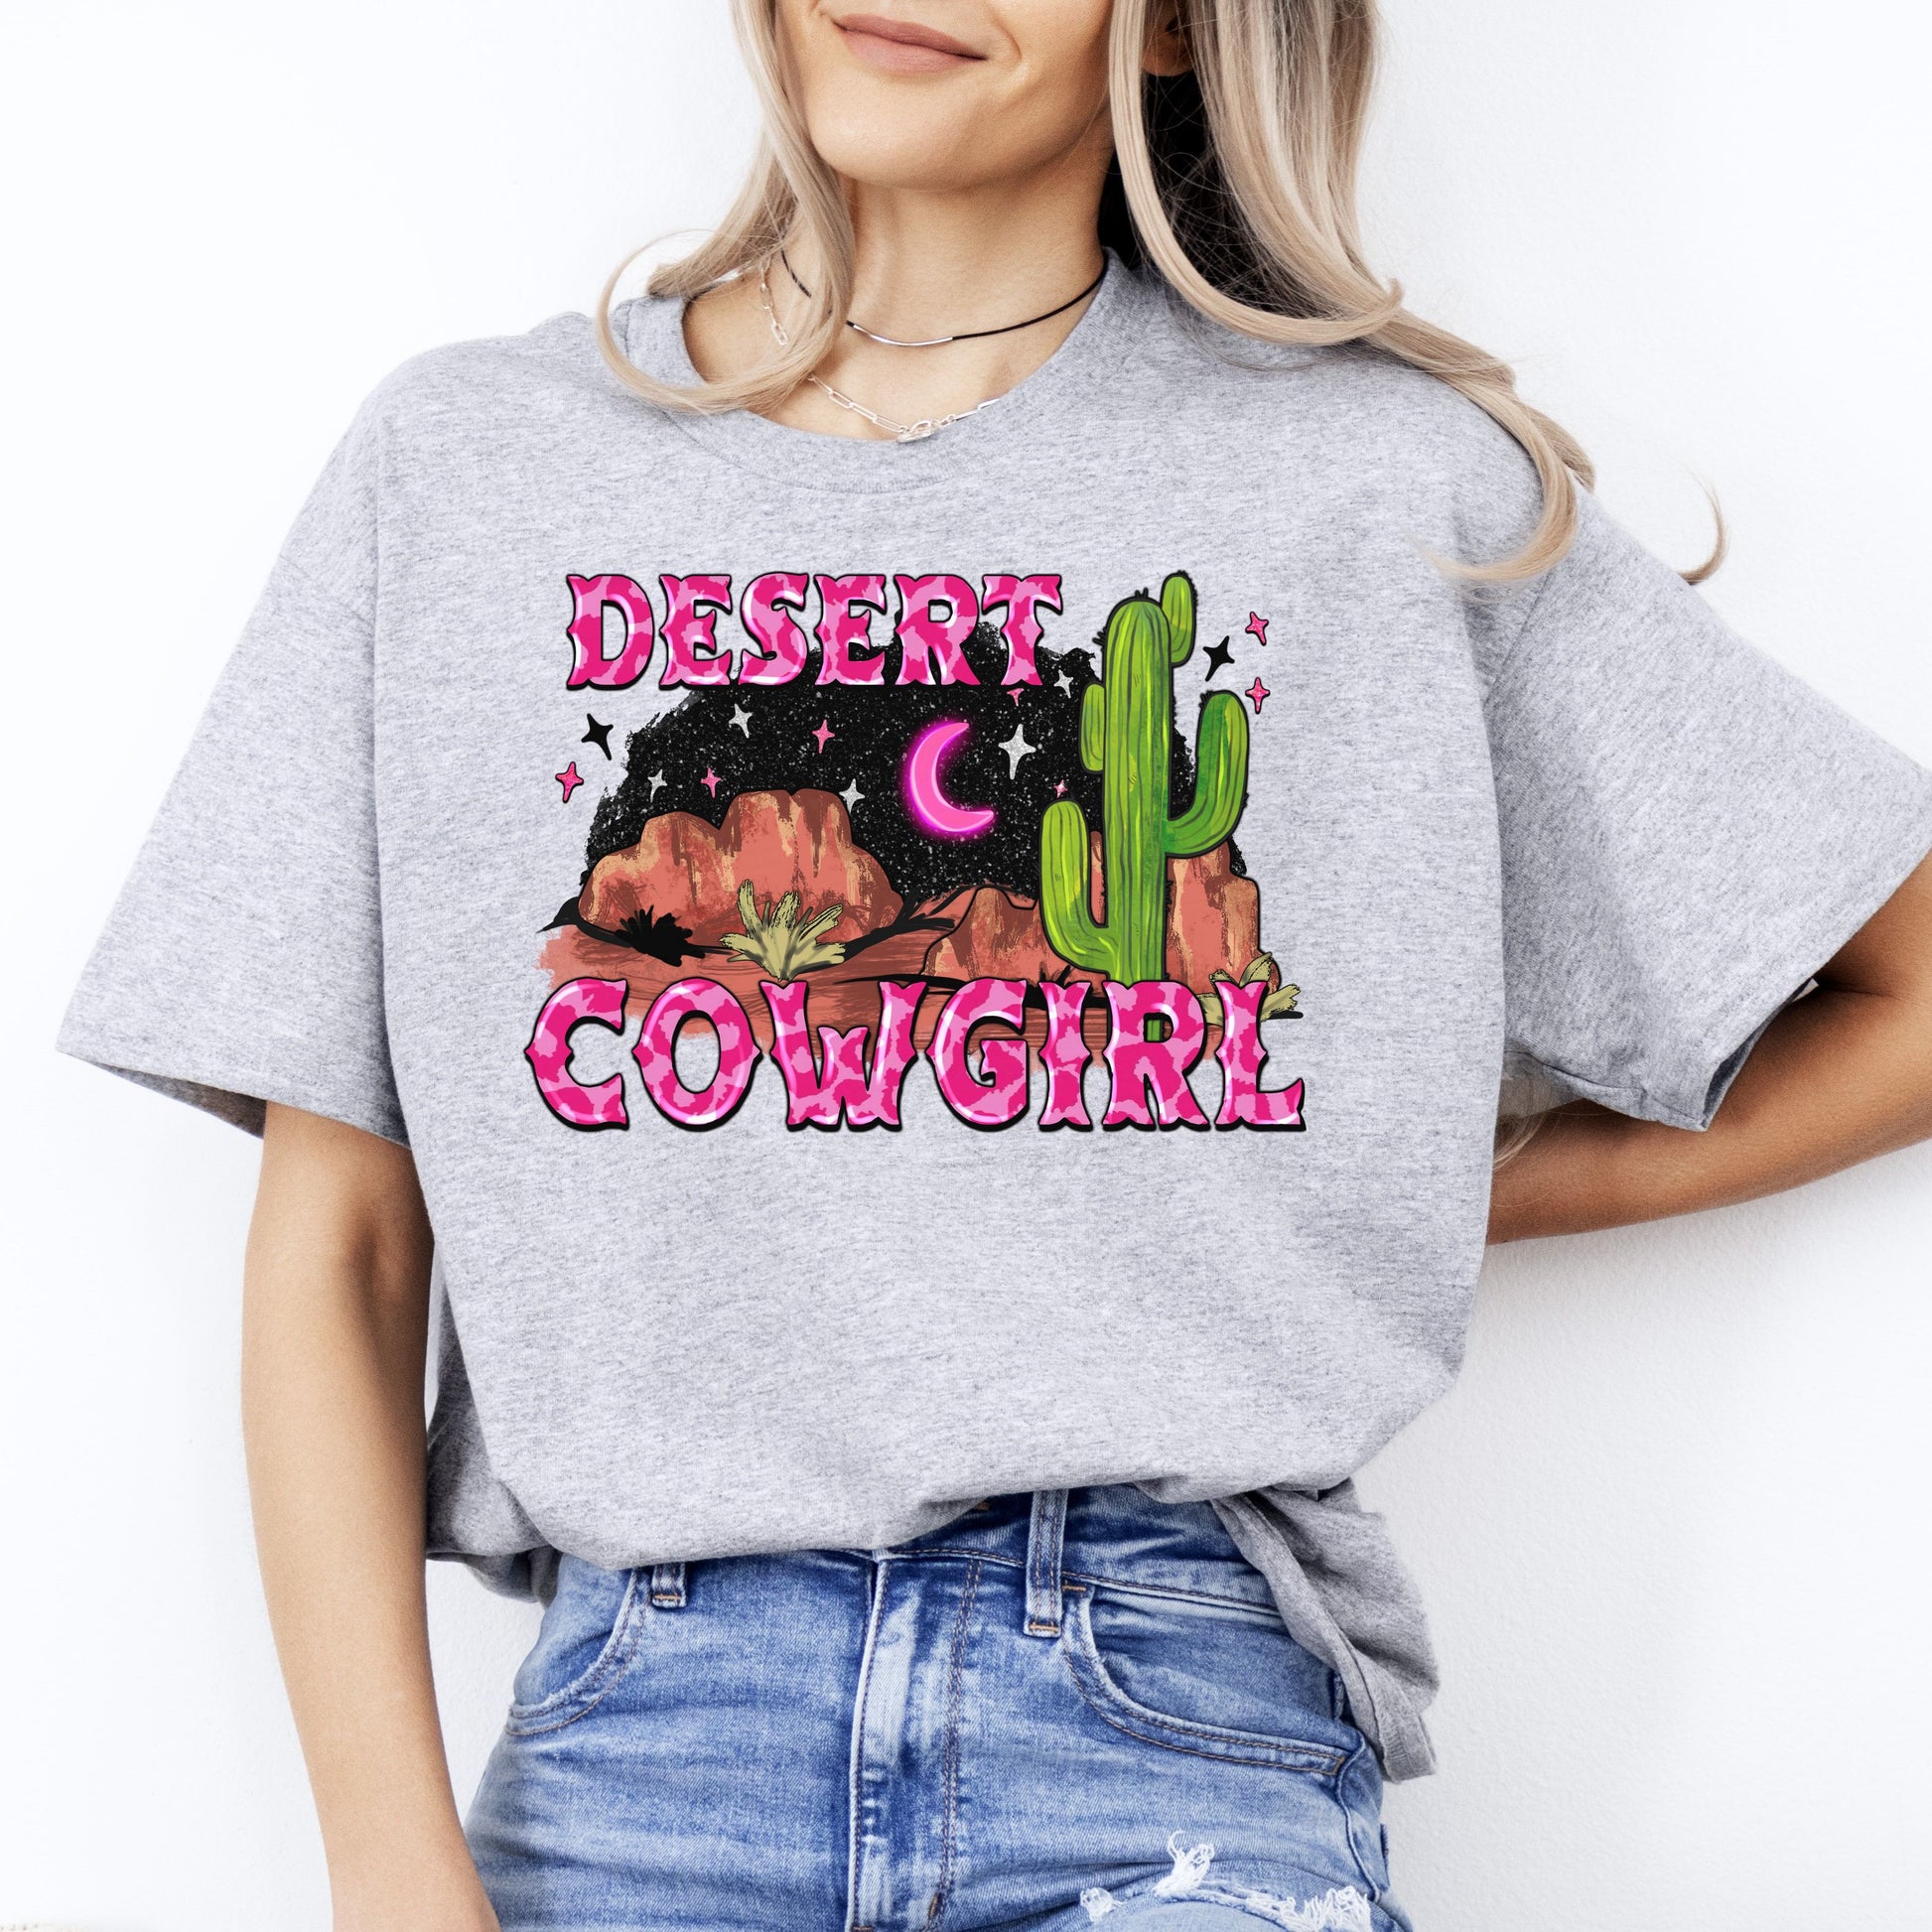 Desert cowgirl T-Shirt gift Western Night desert cactus pink cowgirl Tee Sand White Sport Grey-Sport Grey-Family-Gift-Planet